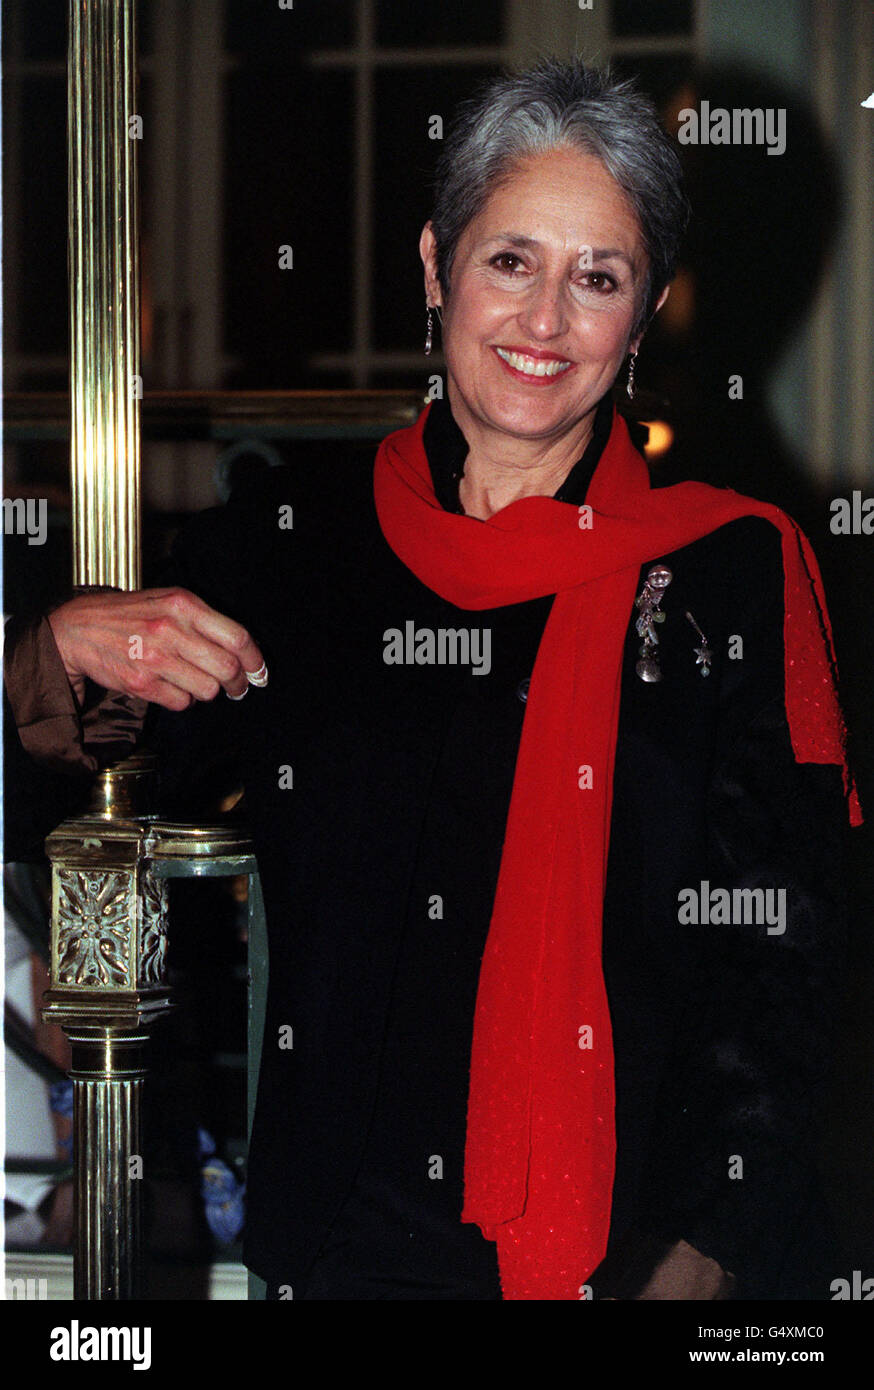 Folk legend Joan Baez at the BBC Radio 2 Folk Awards, held at London's Le Meridien Waldorf Hotel, where she received a Lifetime Acheivement Award in recognition of her contribution to Folk music. Stock Photo